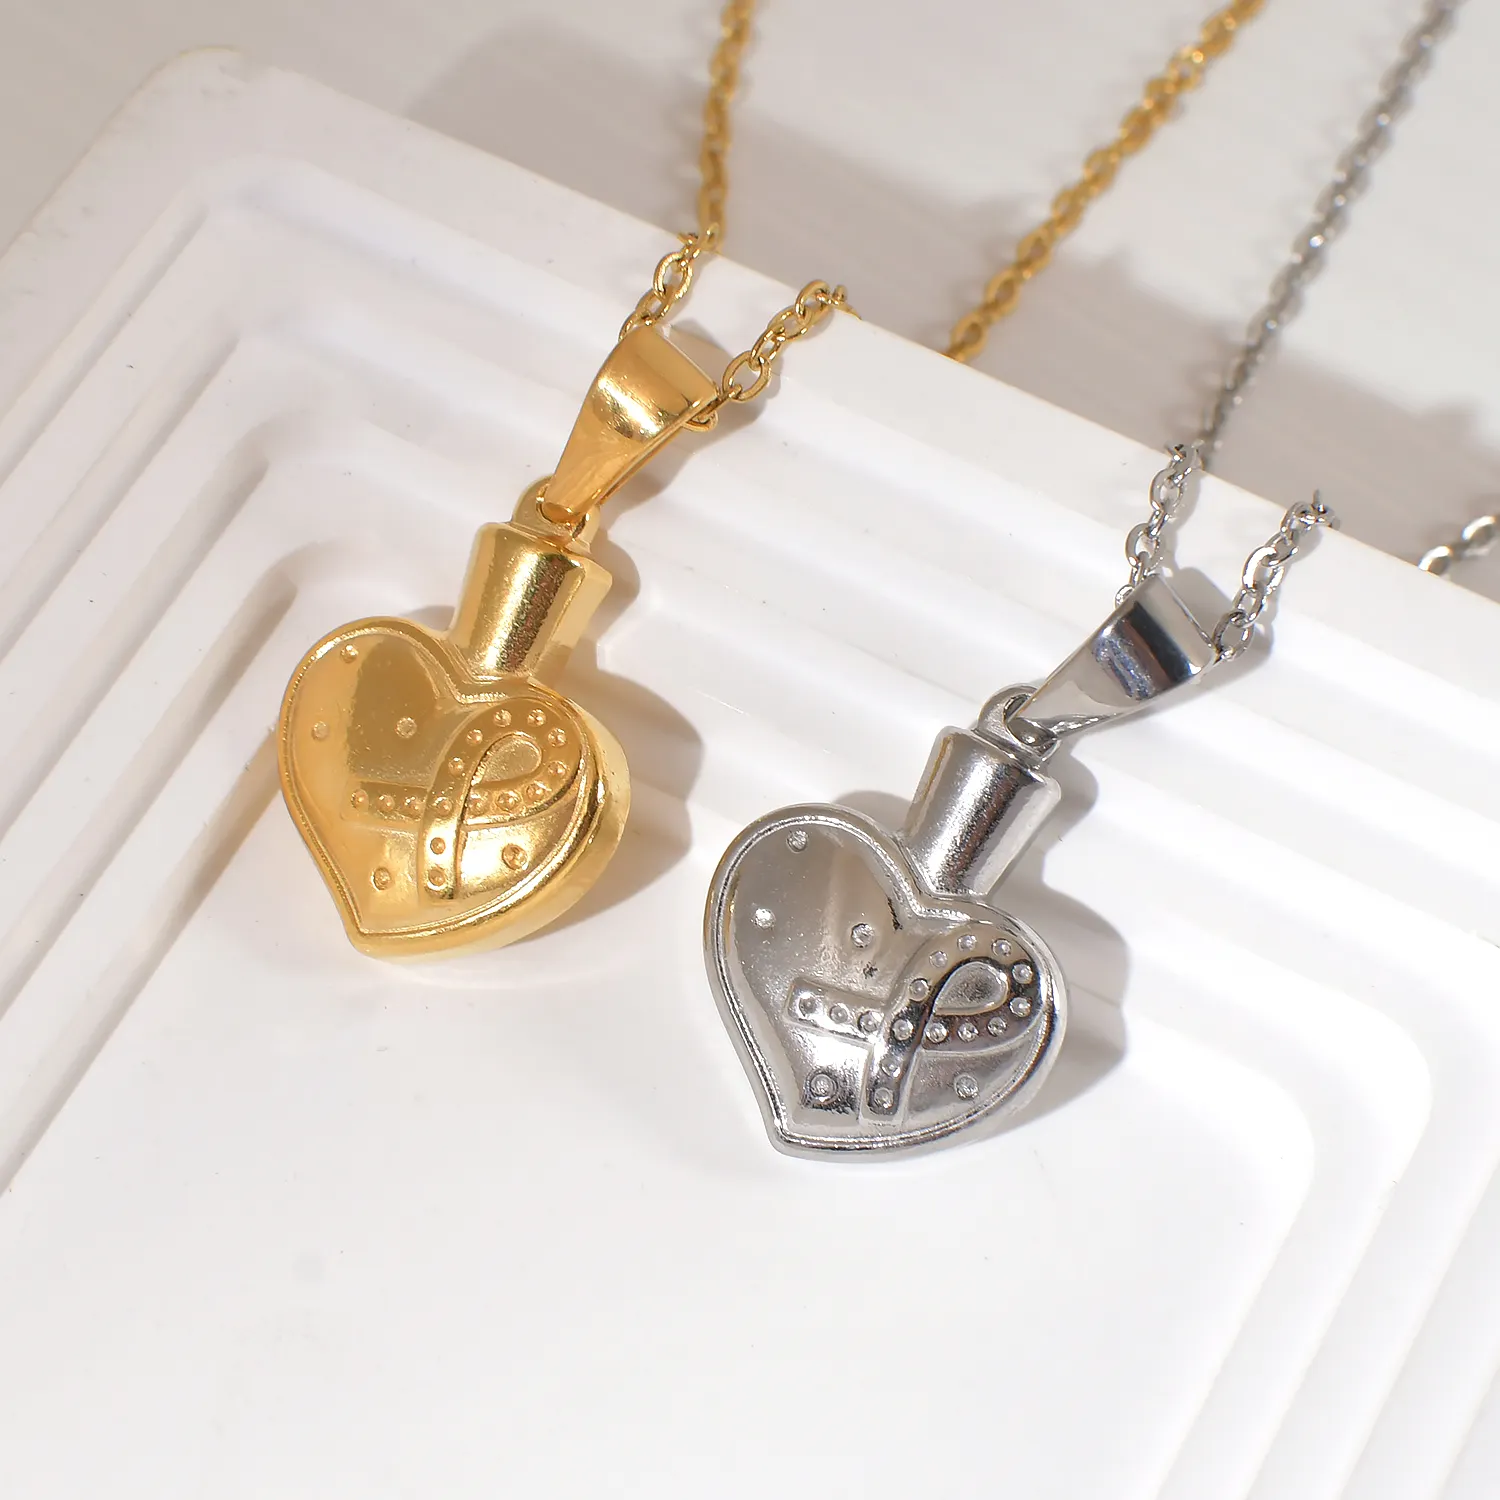 Trendy Cremation Jewelry Urn Necklace Stainless Steel Heart Shape Gem Pendant Necklace Memorial Jewelry